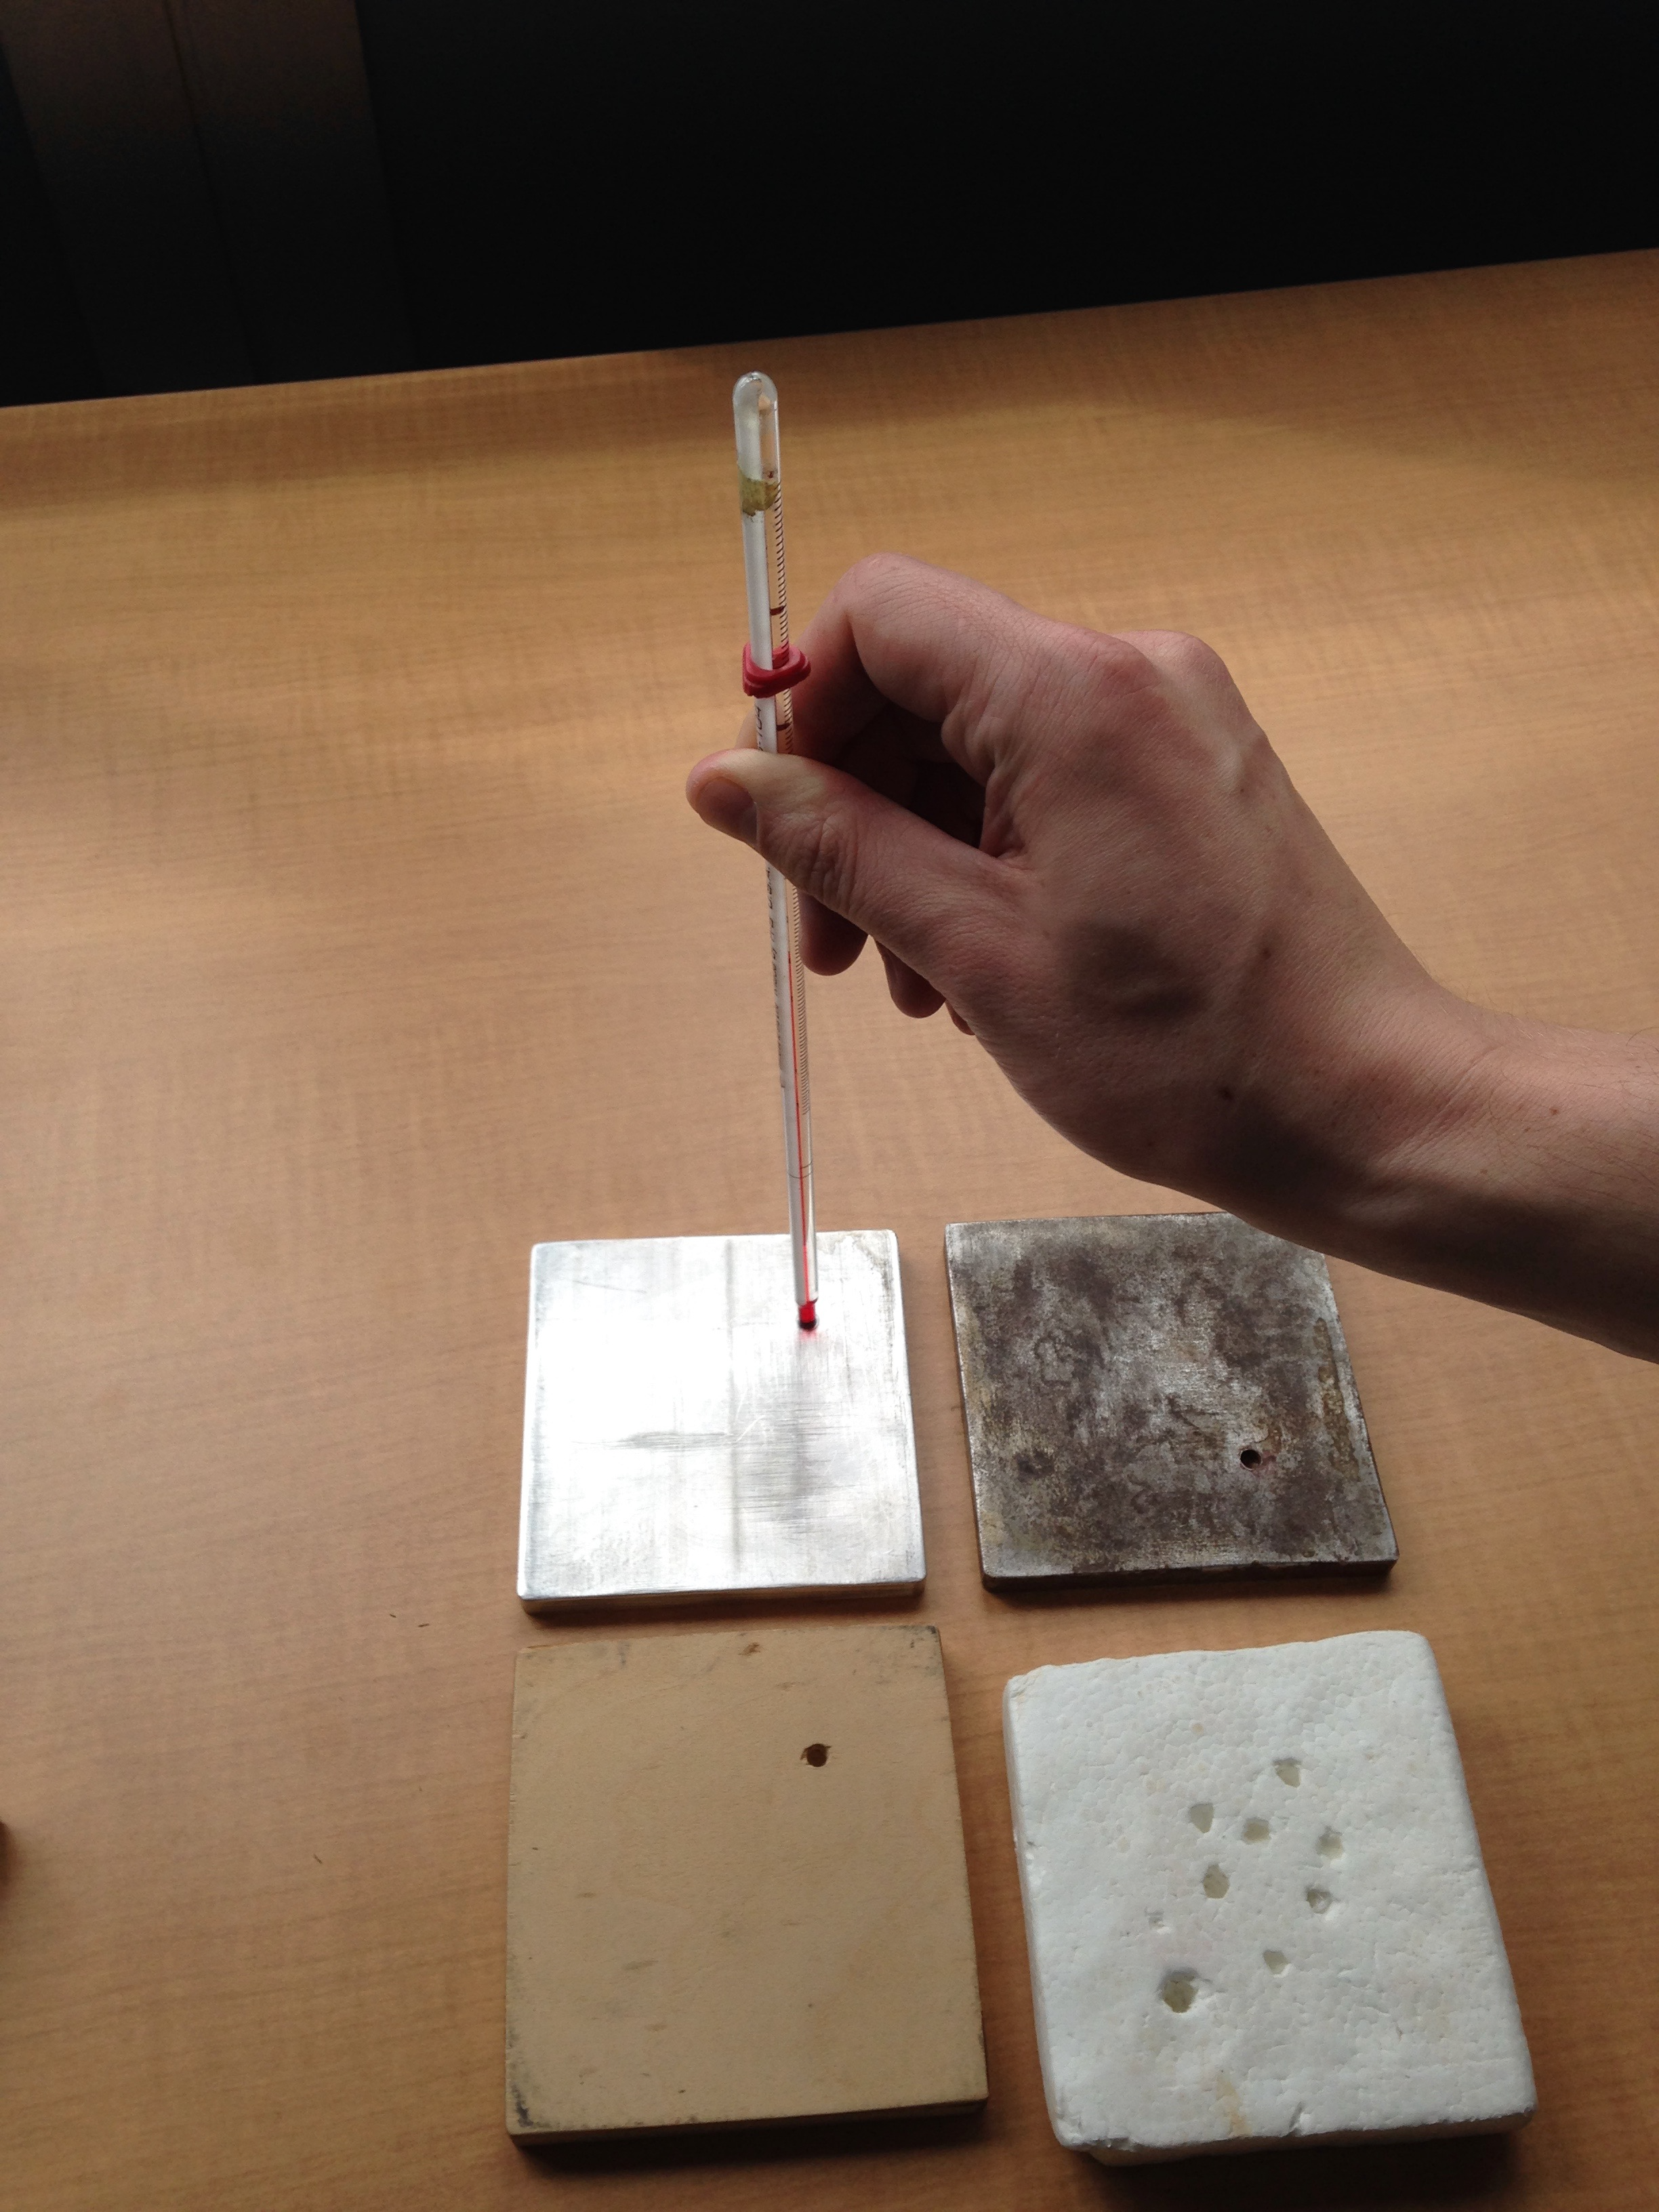 Styrofoam, wood, and two kinds of metal blocks and a thermometer.